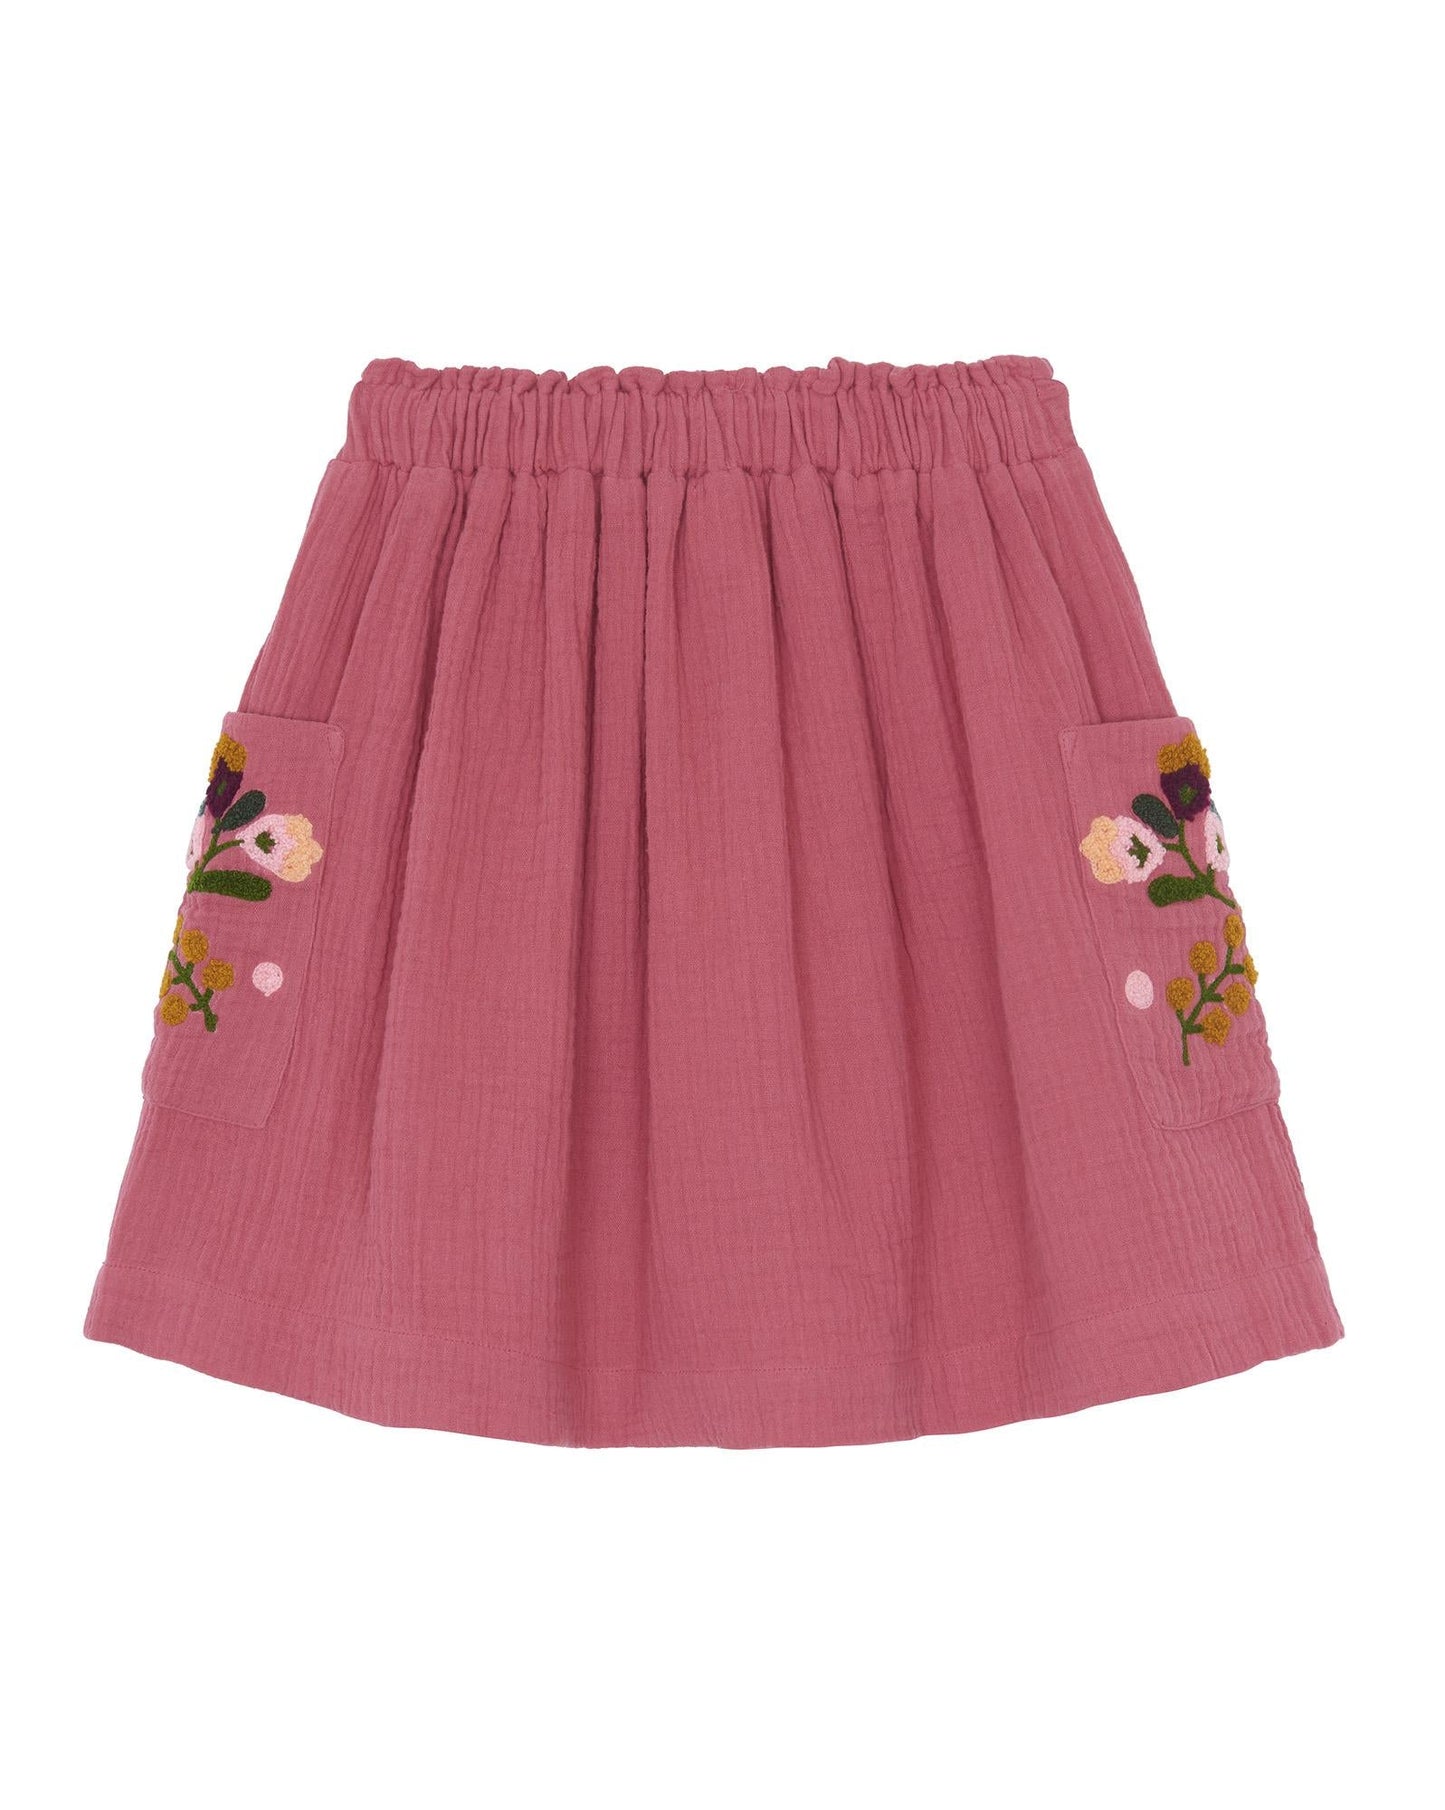 Skirt - hive Pink in double cotton gauze